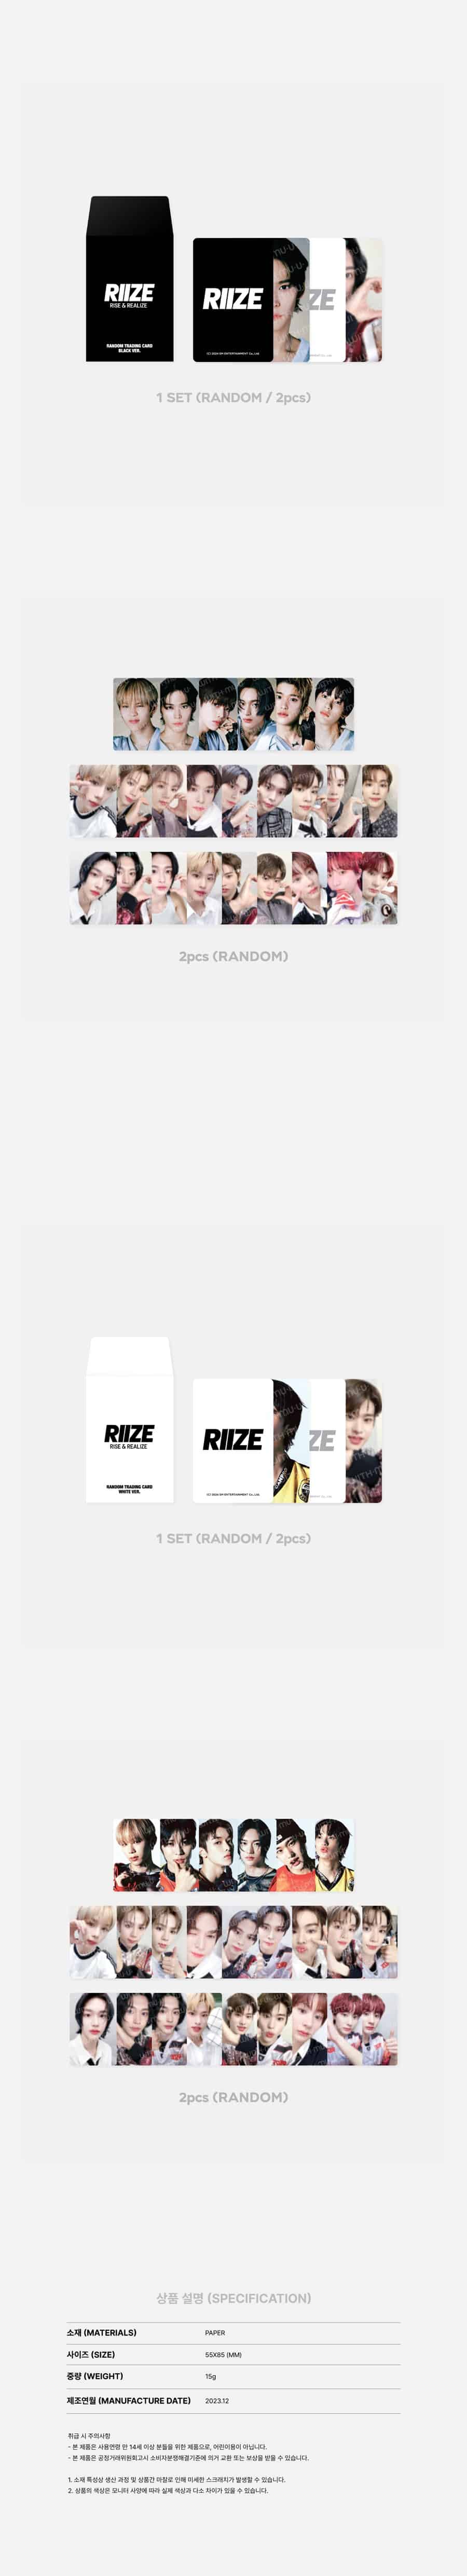 riize-04-random-trading-card-set-2024-riize-riize-up-official-md-wholesales